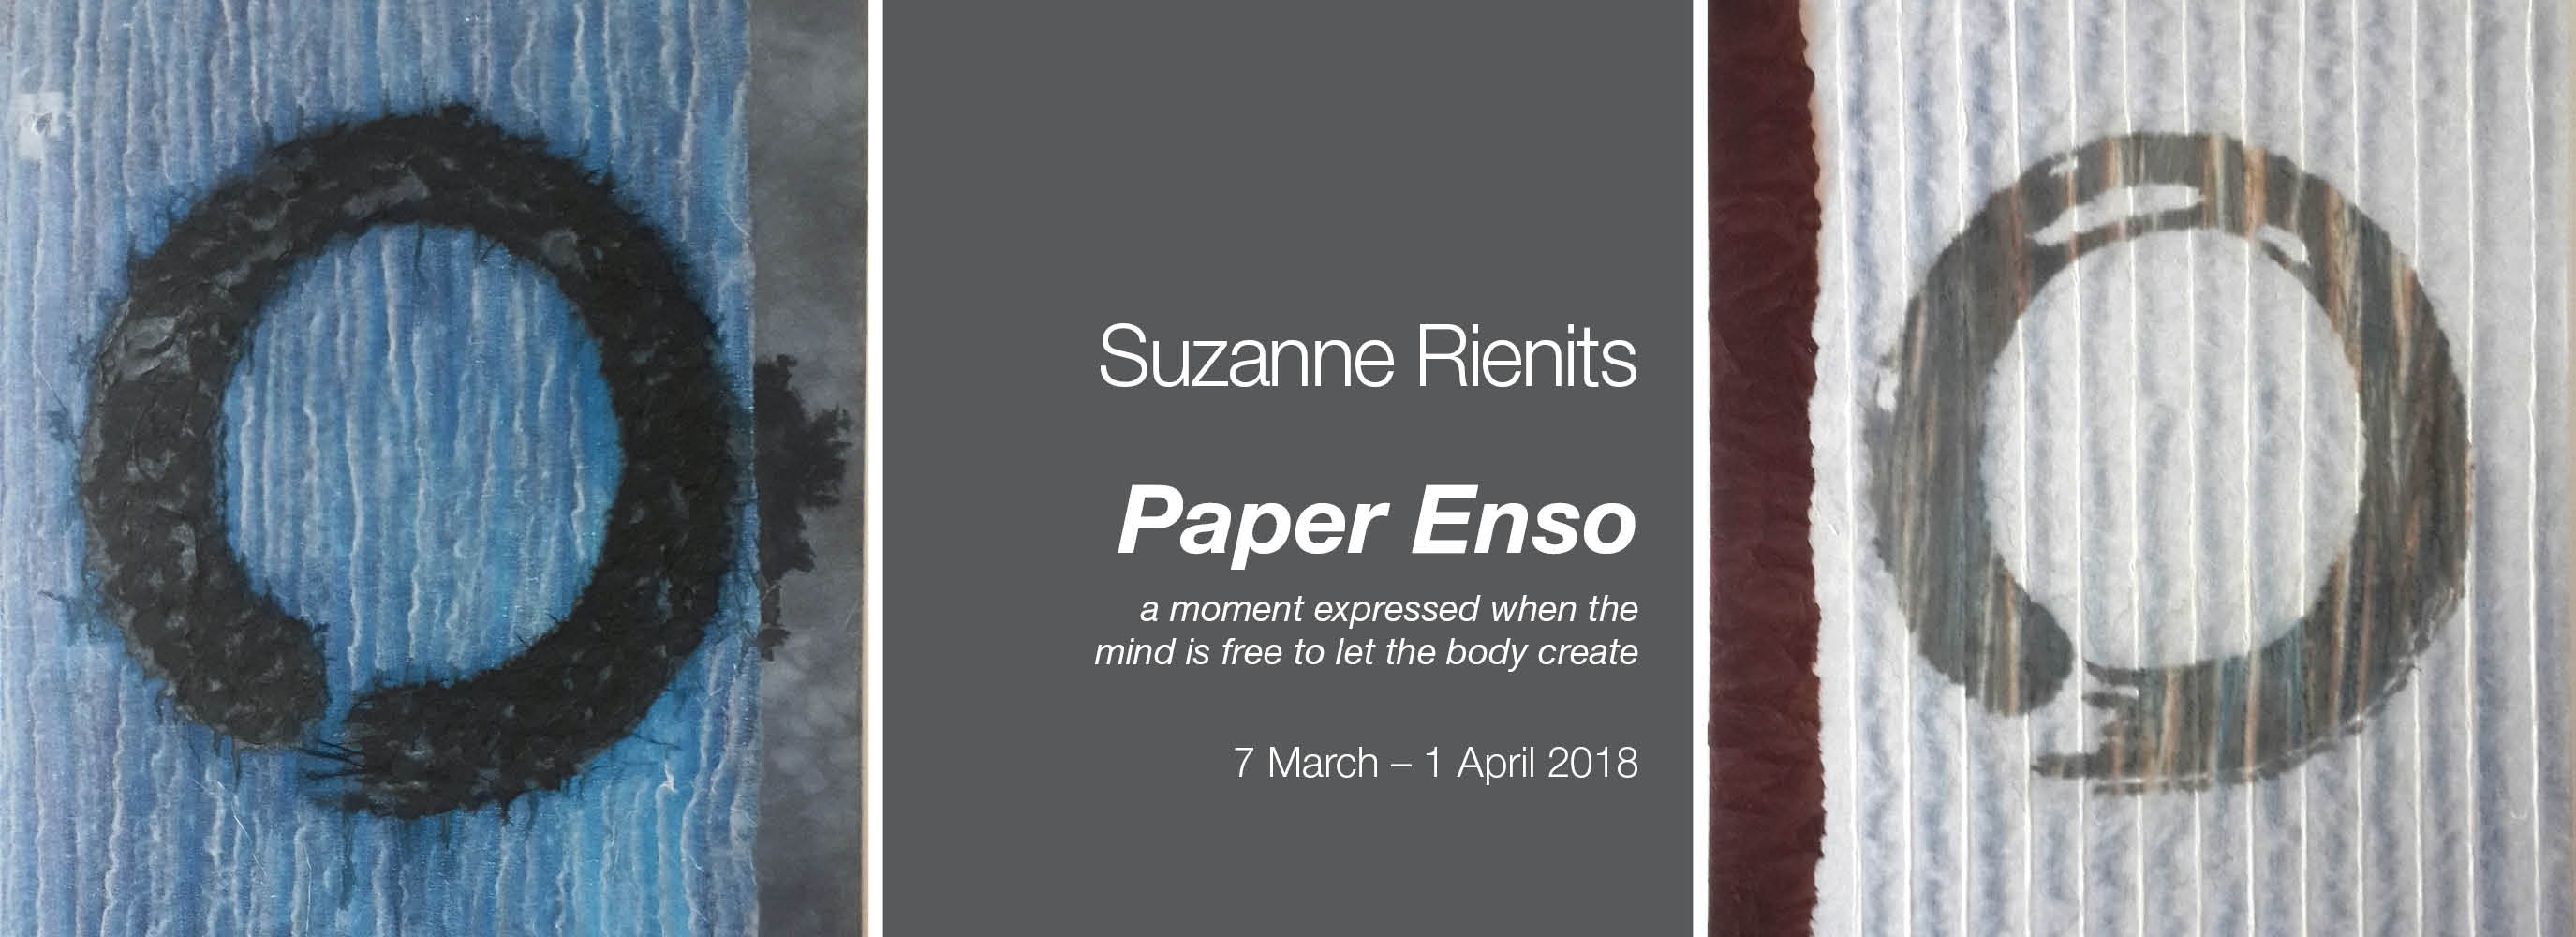 SuzanneRienits PaperEnso 1320x480 v3